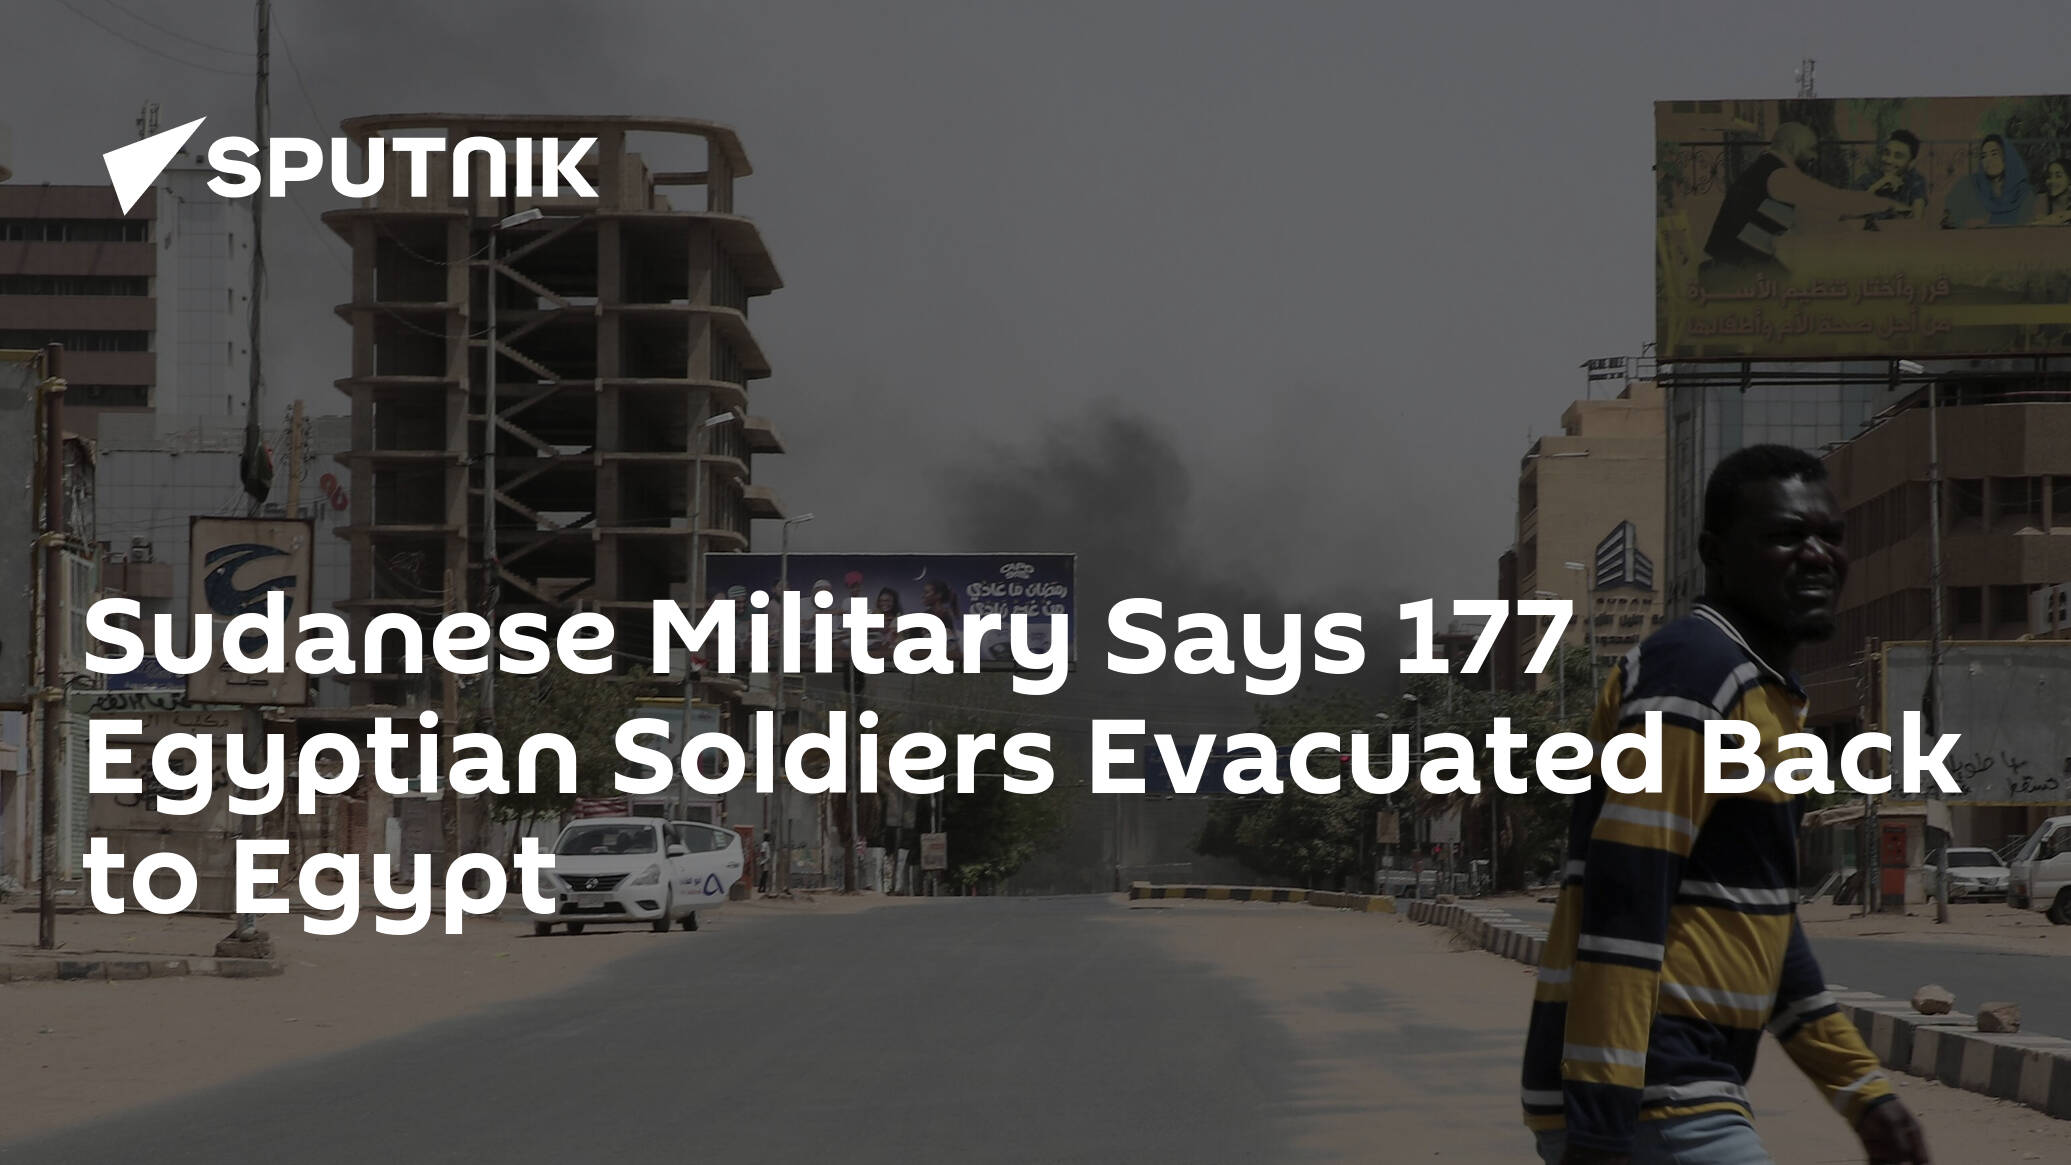 Sudanese Military Says 177 Egyptian Soldiers Evacuated Back to Egypt